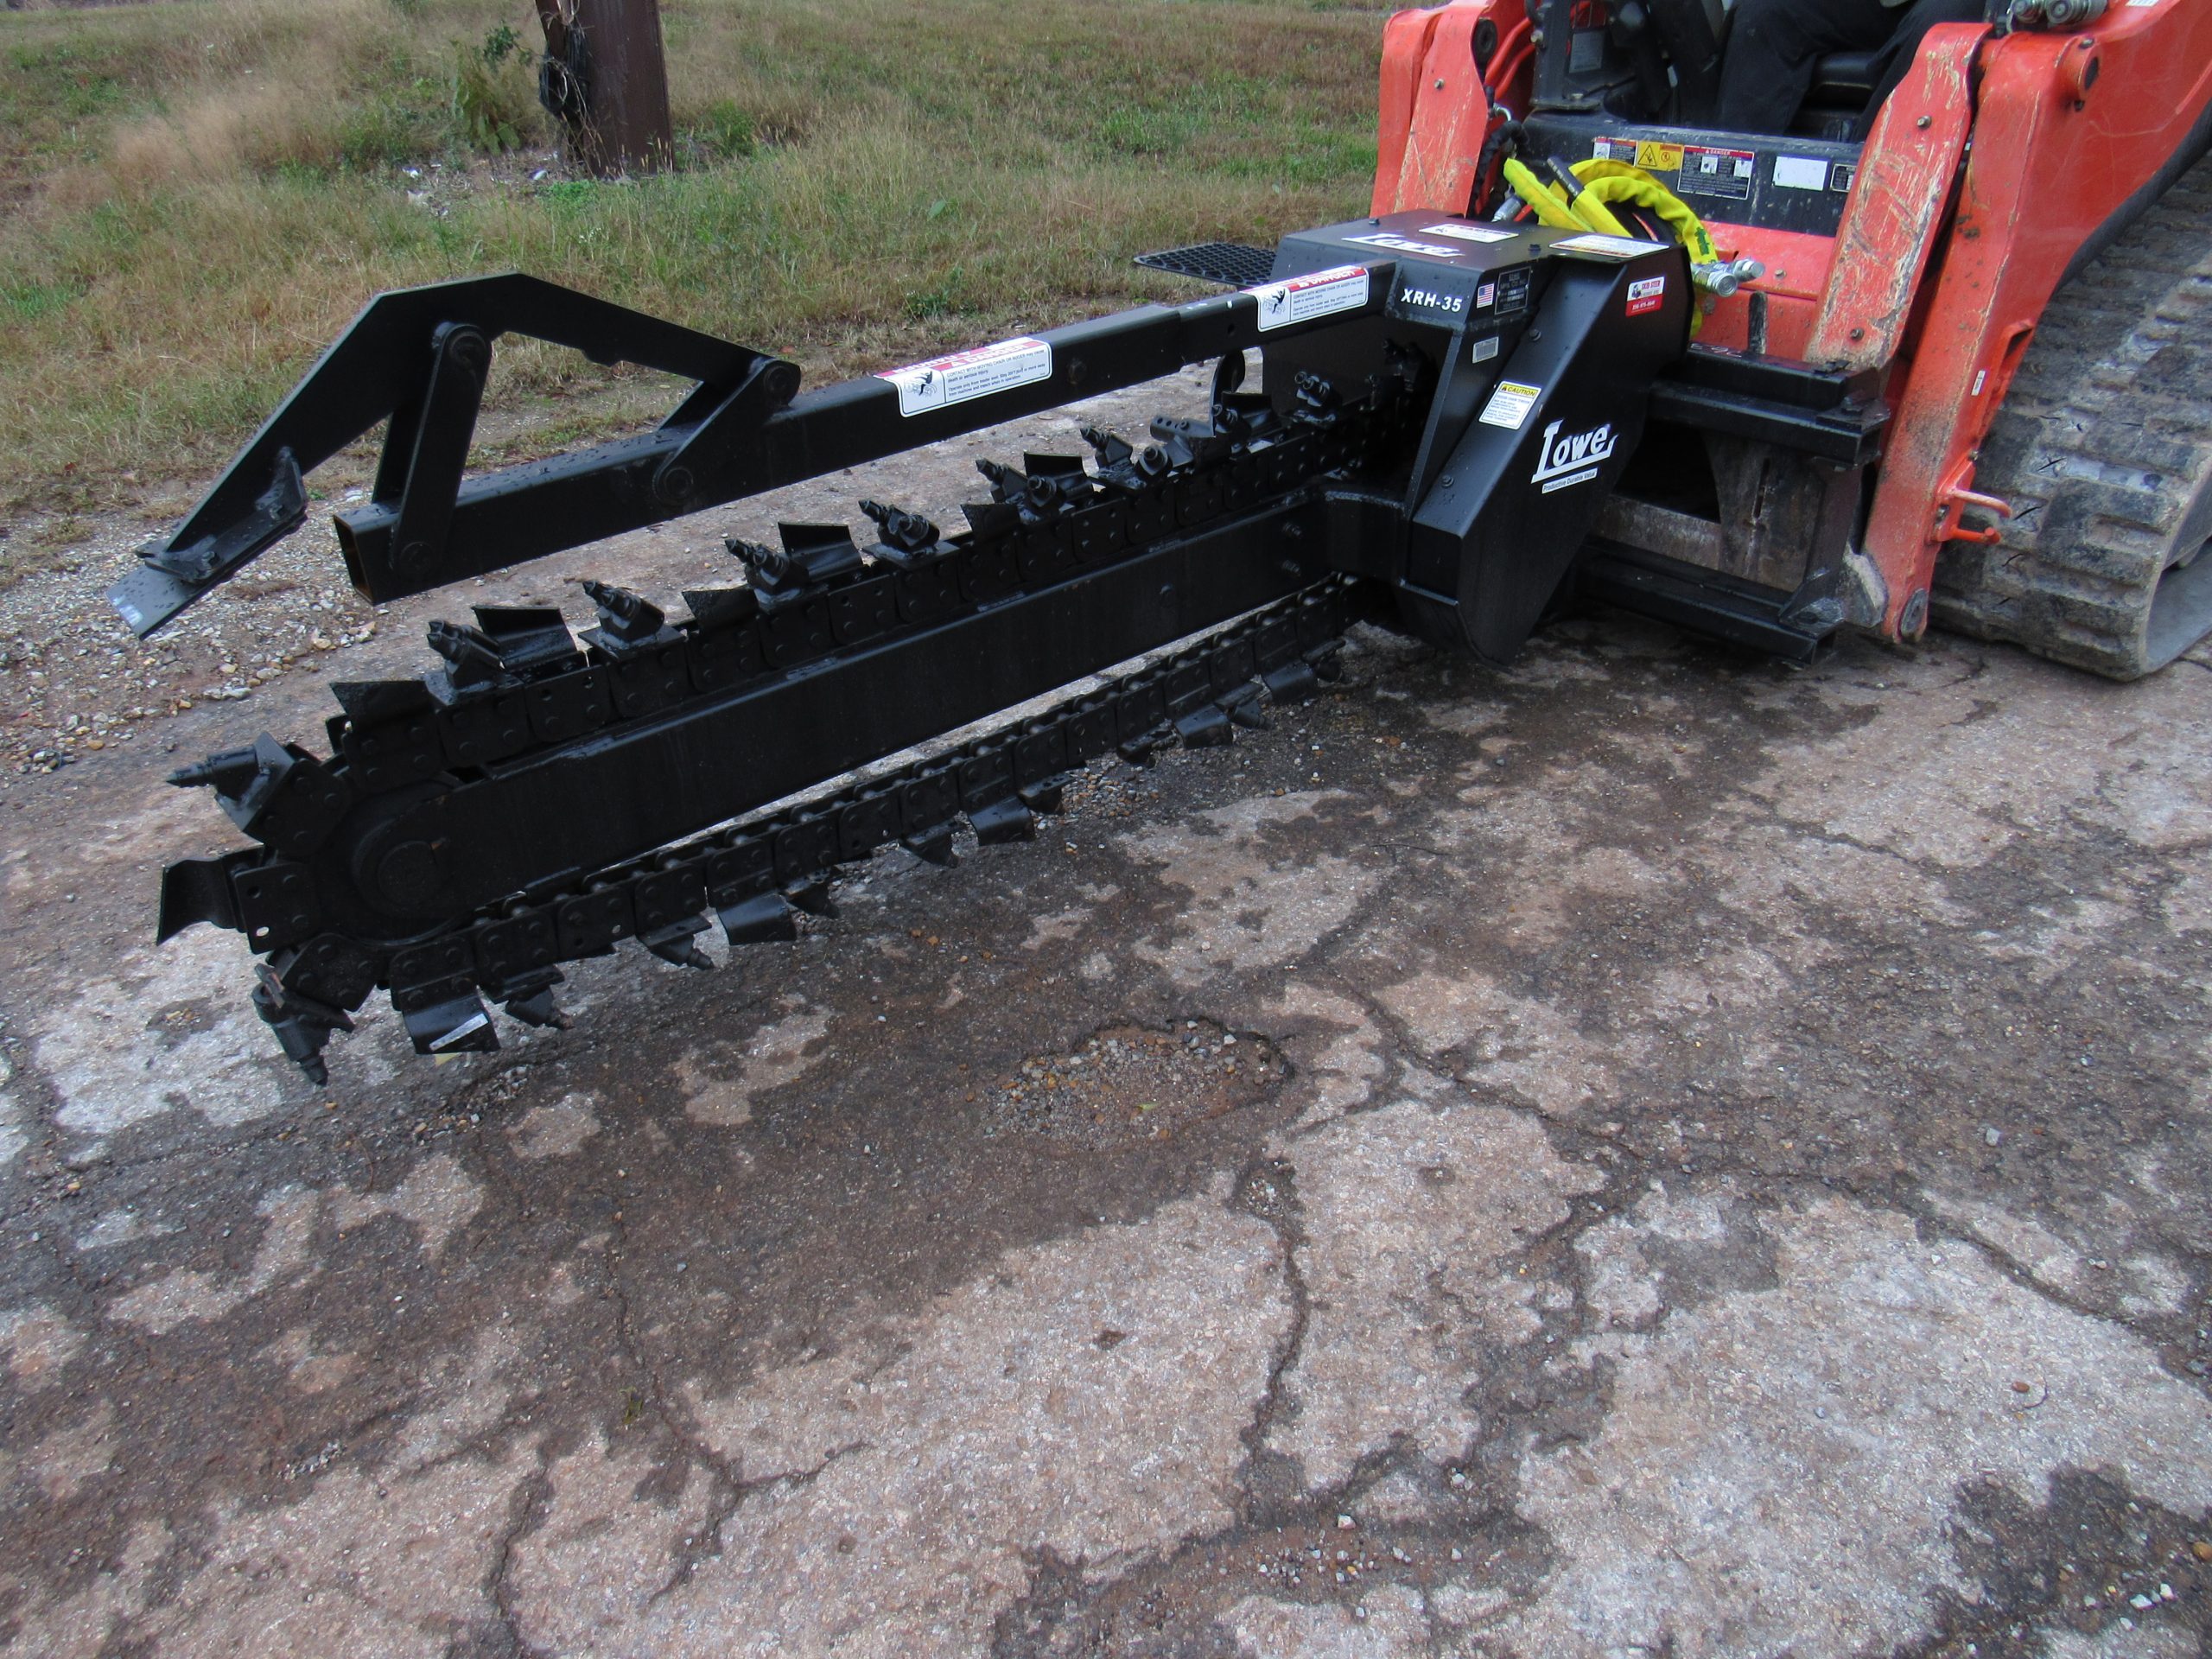 Trencher Attachments for Skid Steer Loaders